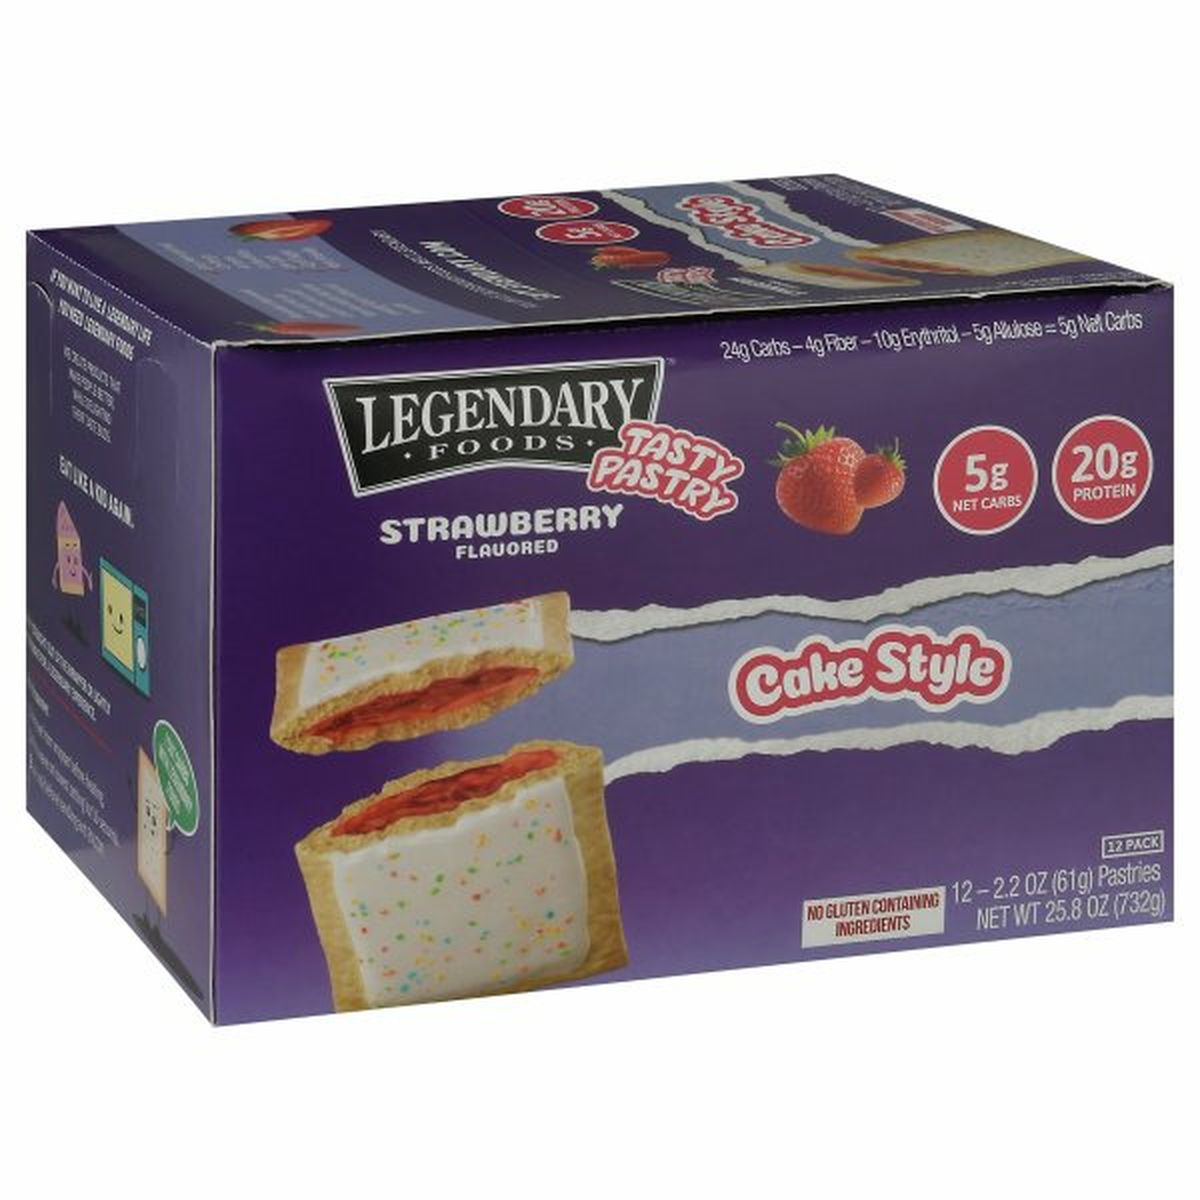 Calories in Legendary Foods Pastries, Strawberry Flavored, 12 Pack